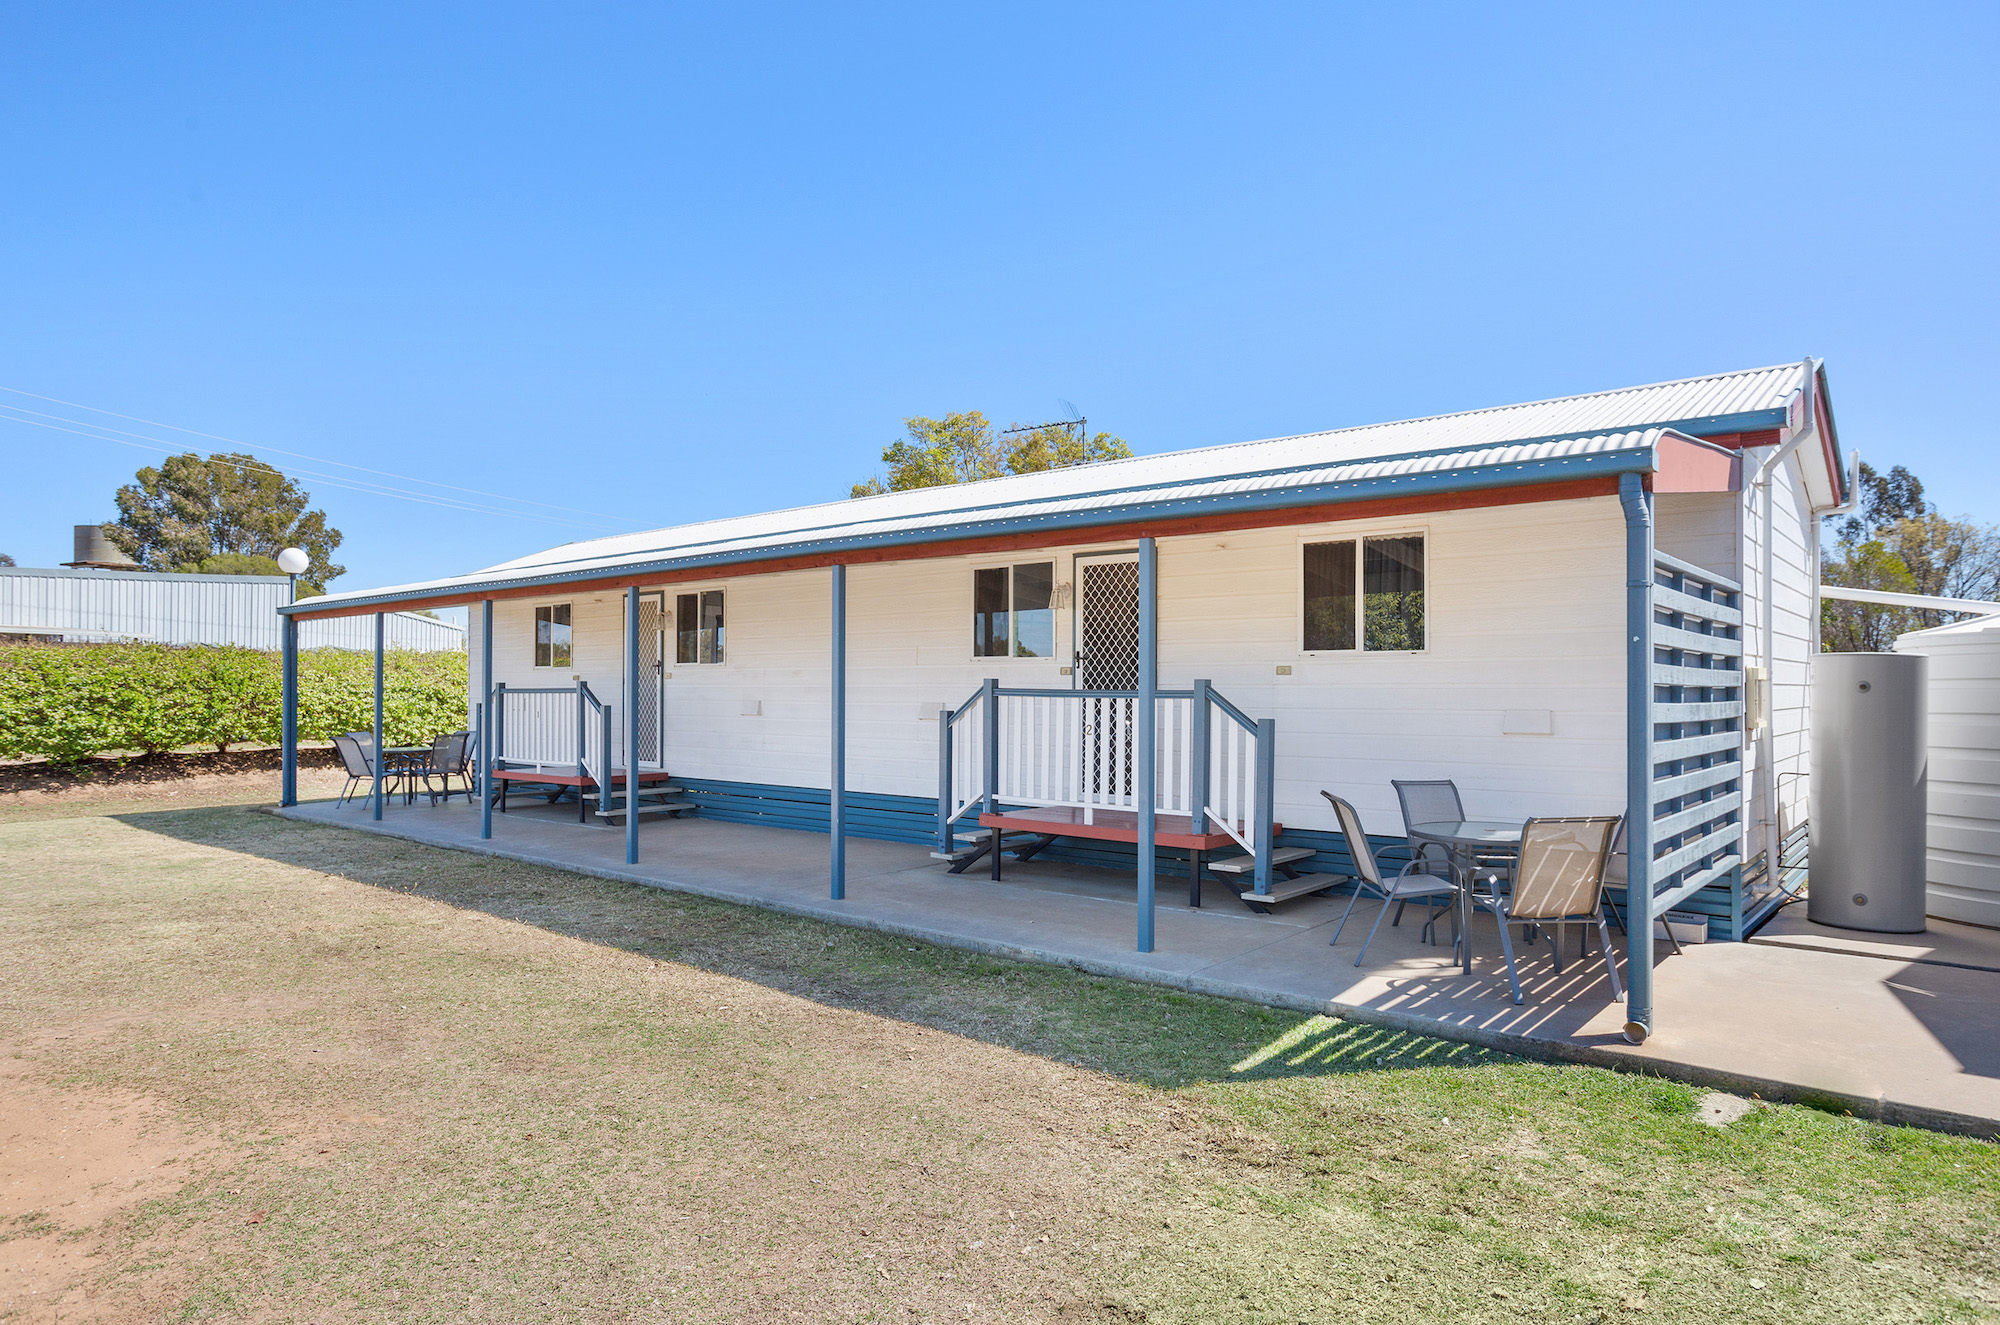 Family 2 Bed Cabin - Pelican Rest - St George Qld